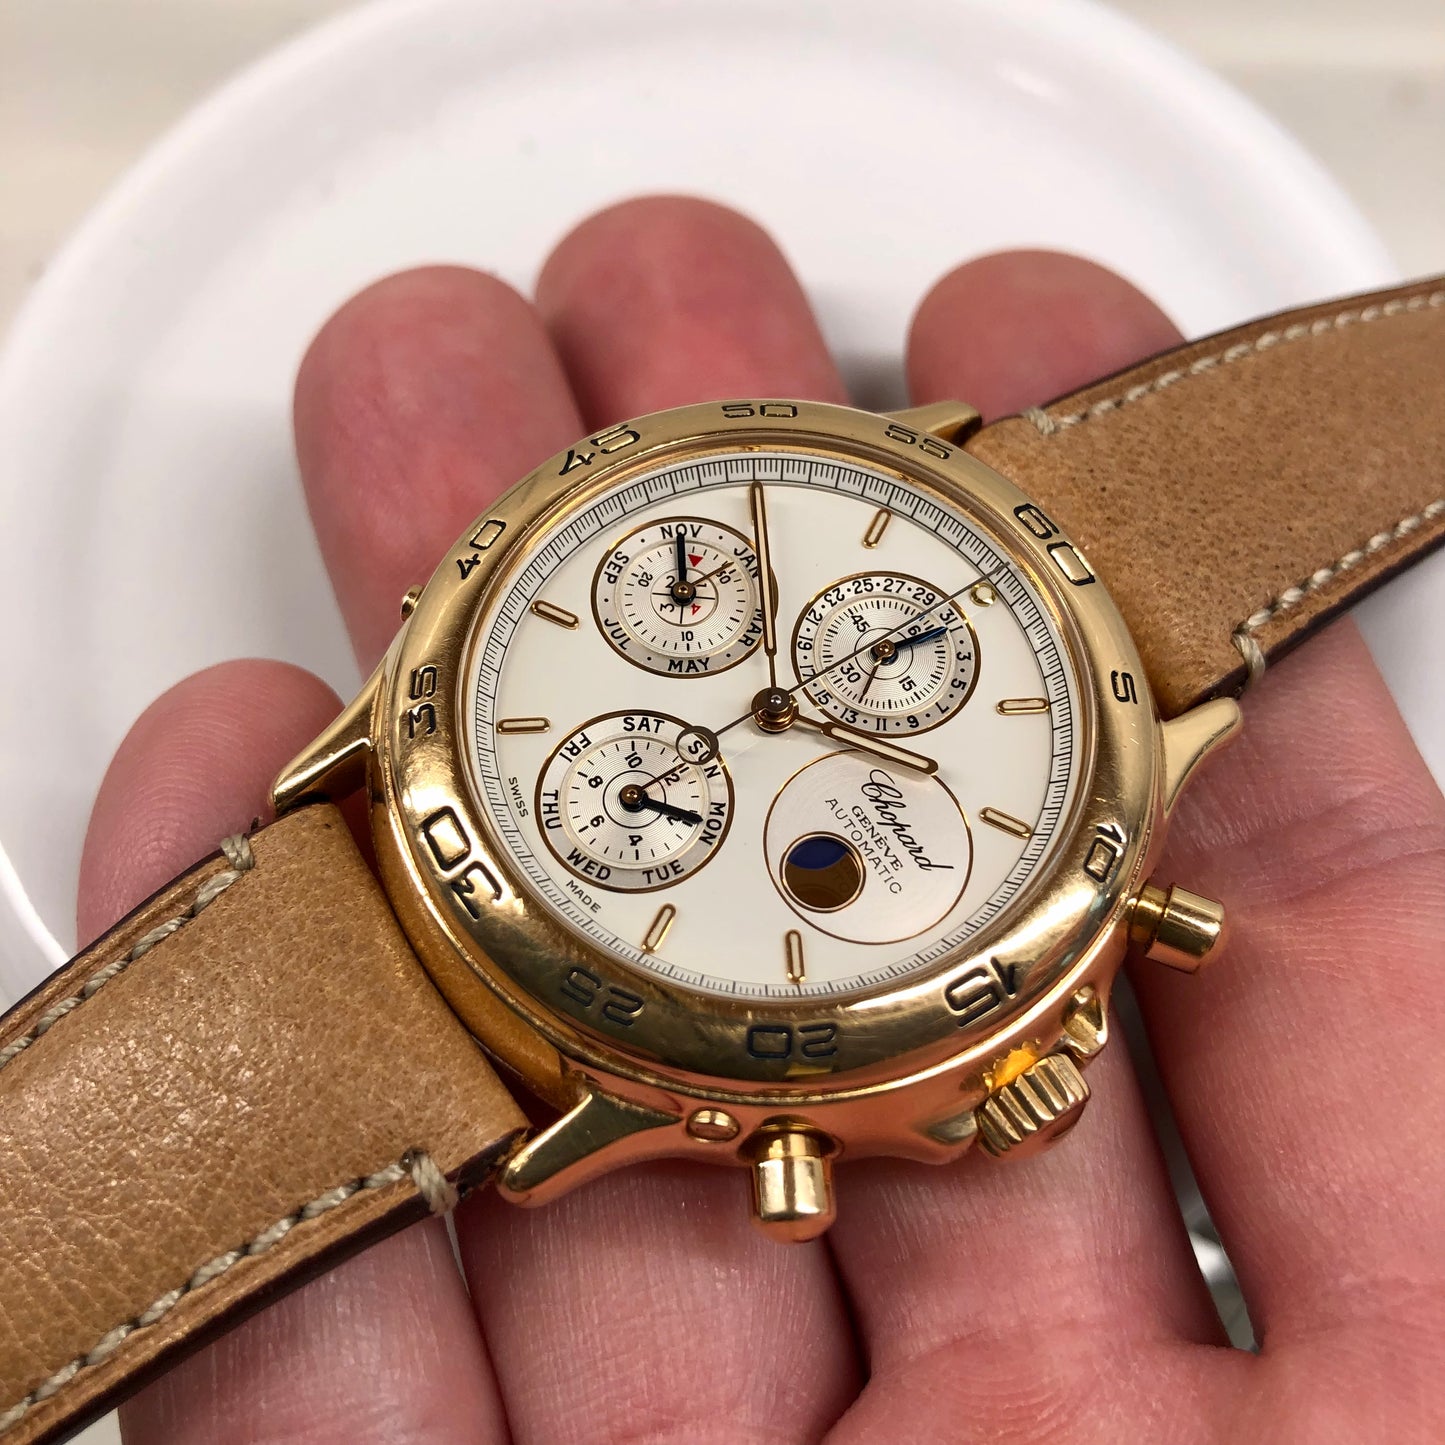 Chopard Classique Perpetual Calendar Chronograph 36/1208 41mm Automatic Limited Edition Wristwatch - Hashtag Watch Company